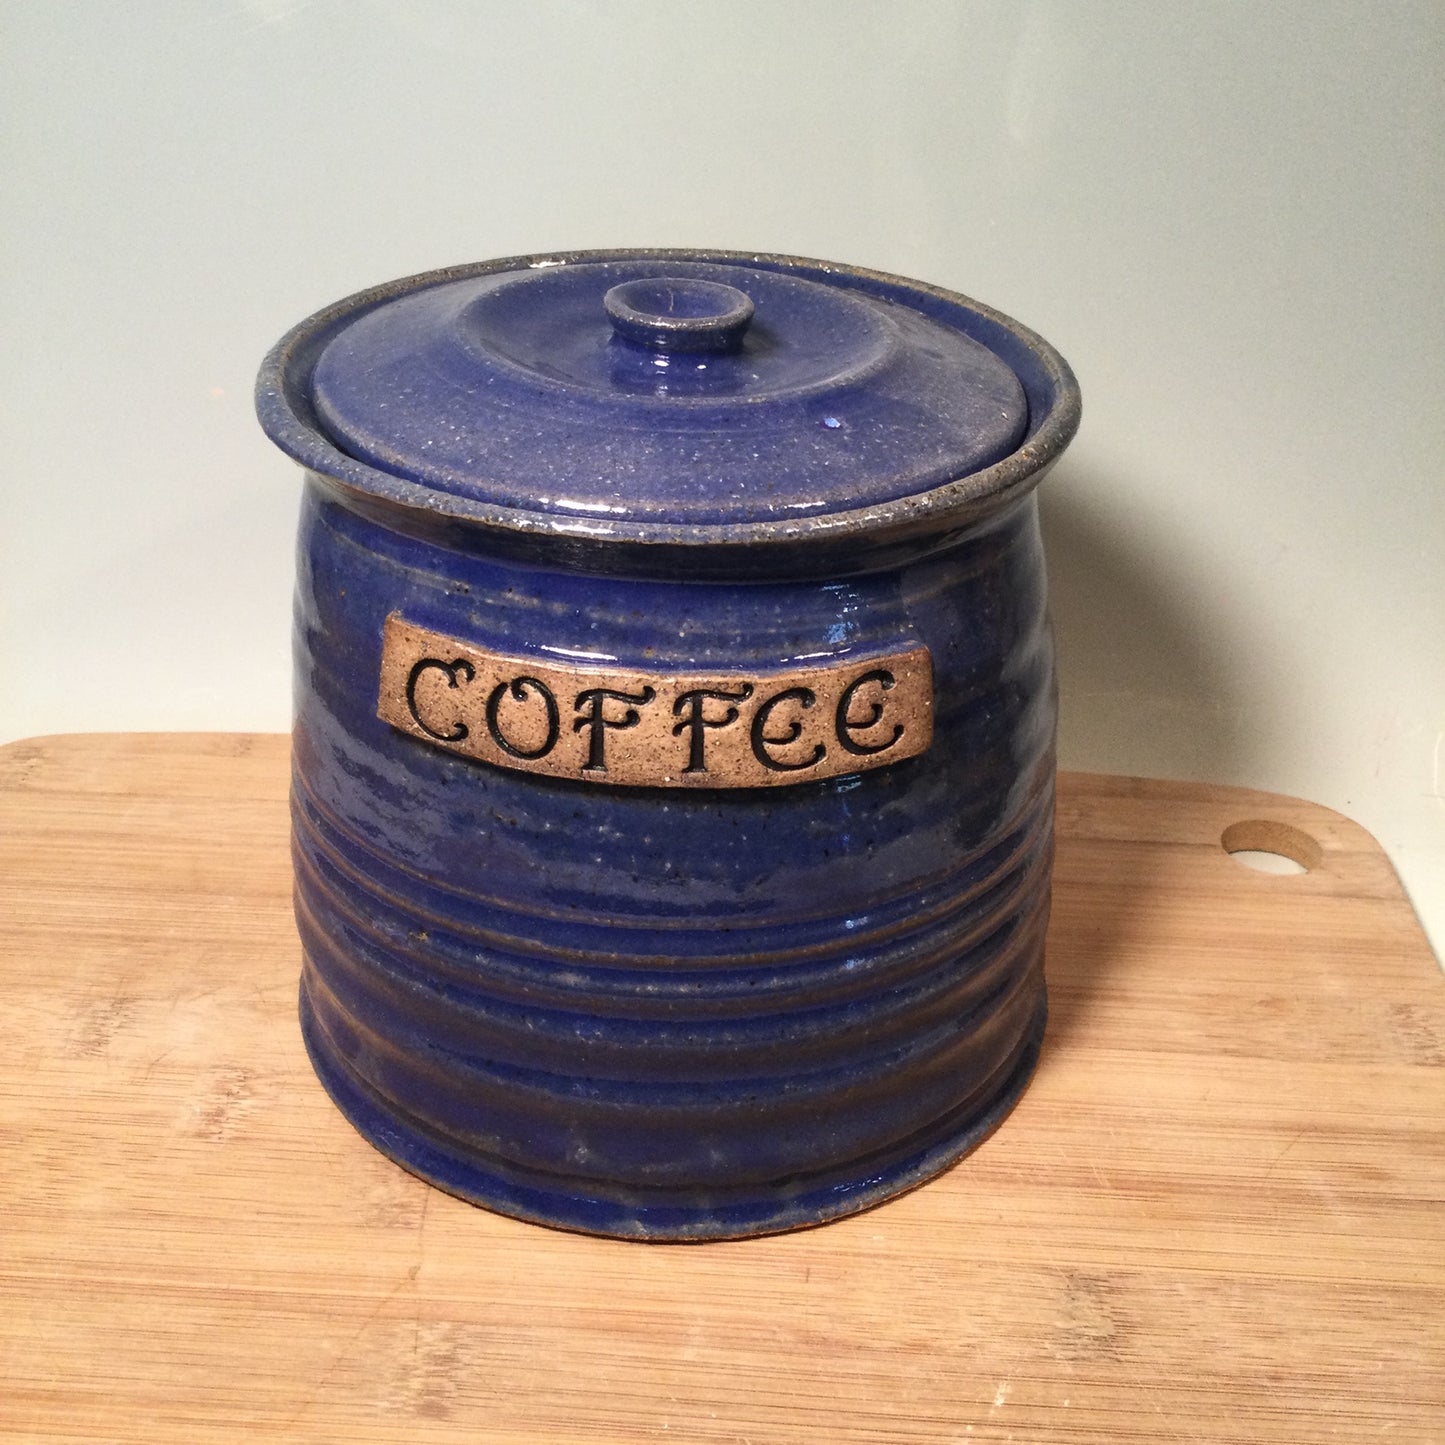 Personalized Cookie Jar/ Kitchen Canister